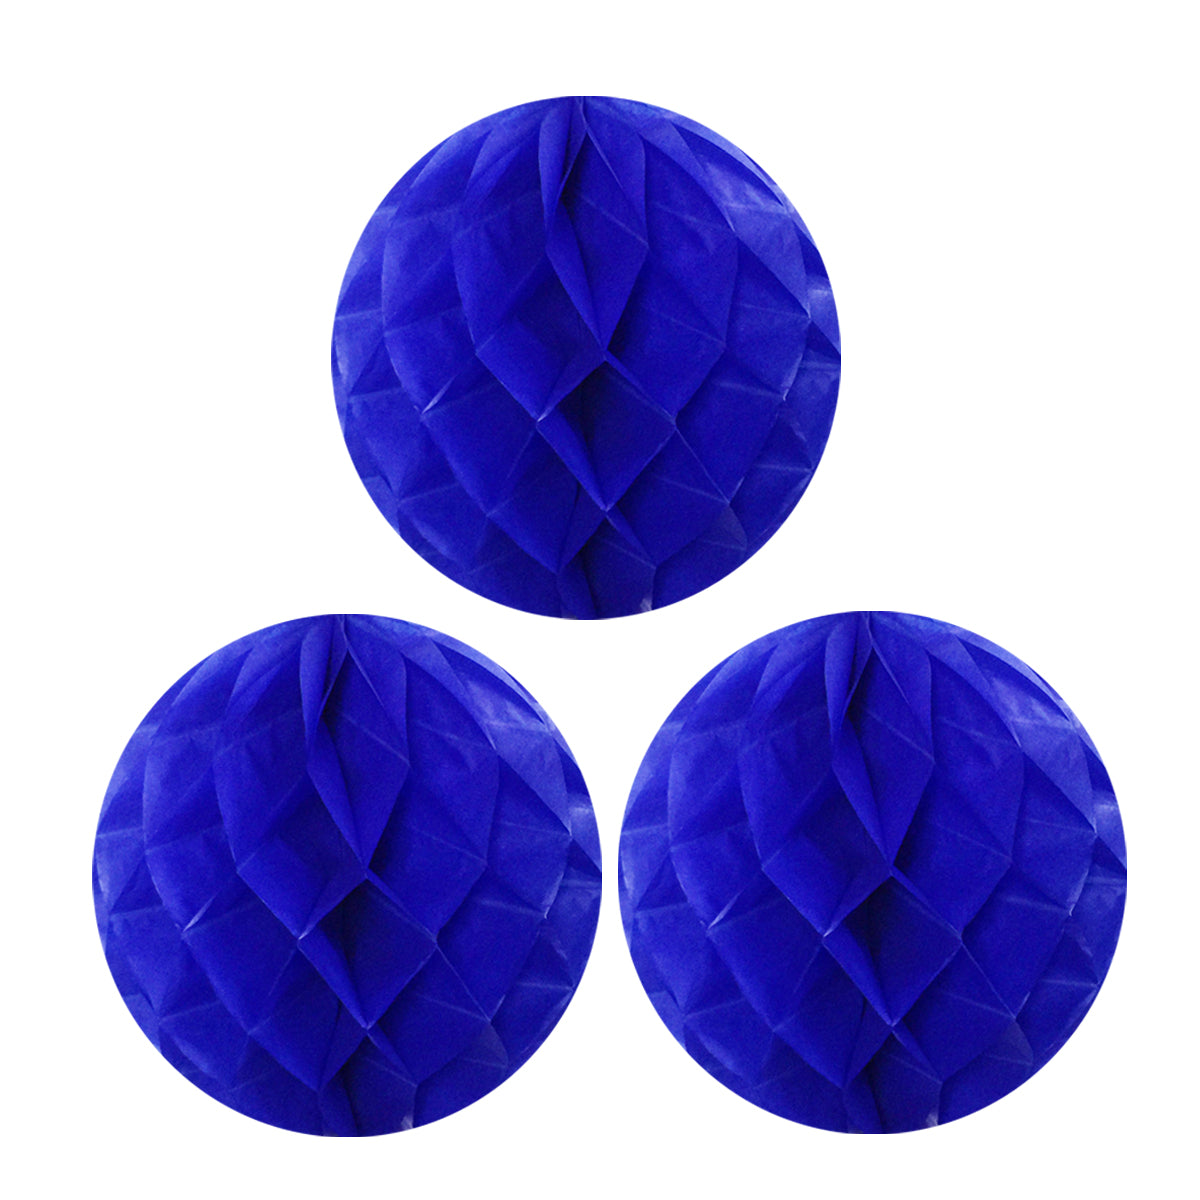 Wrapables 12" Set of 3 Tissue Honeycomb Ball Party Decorations